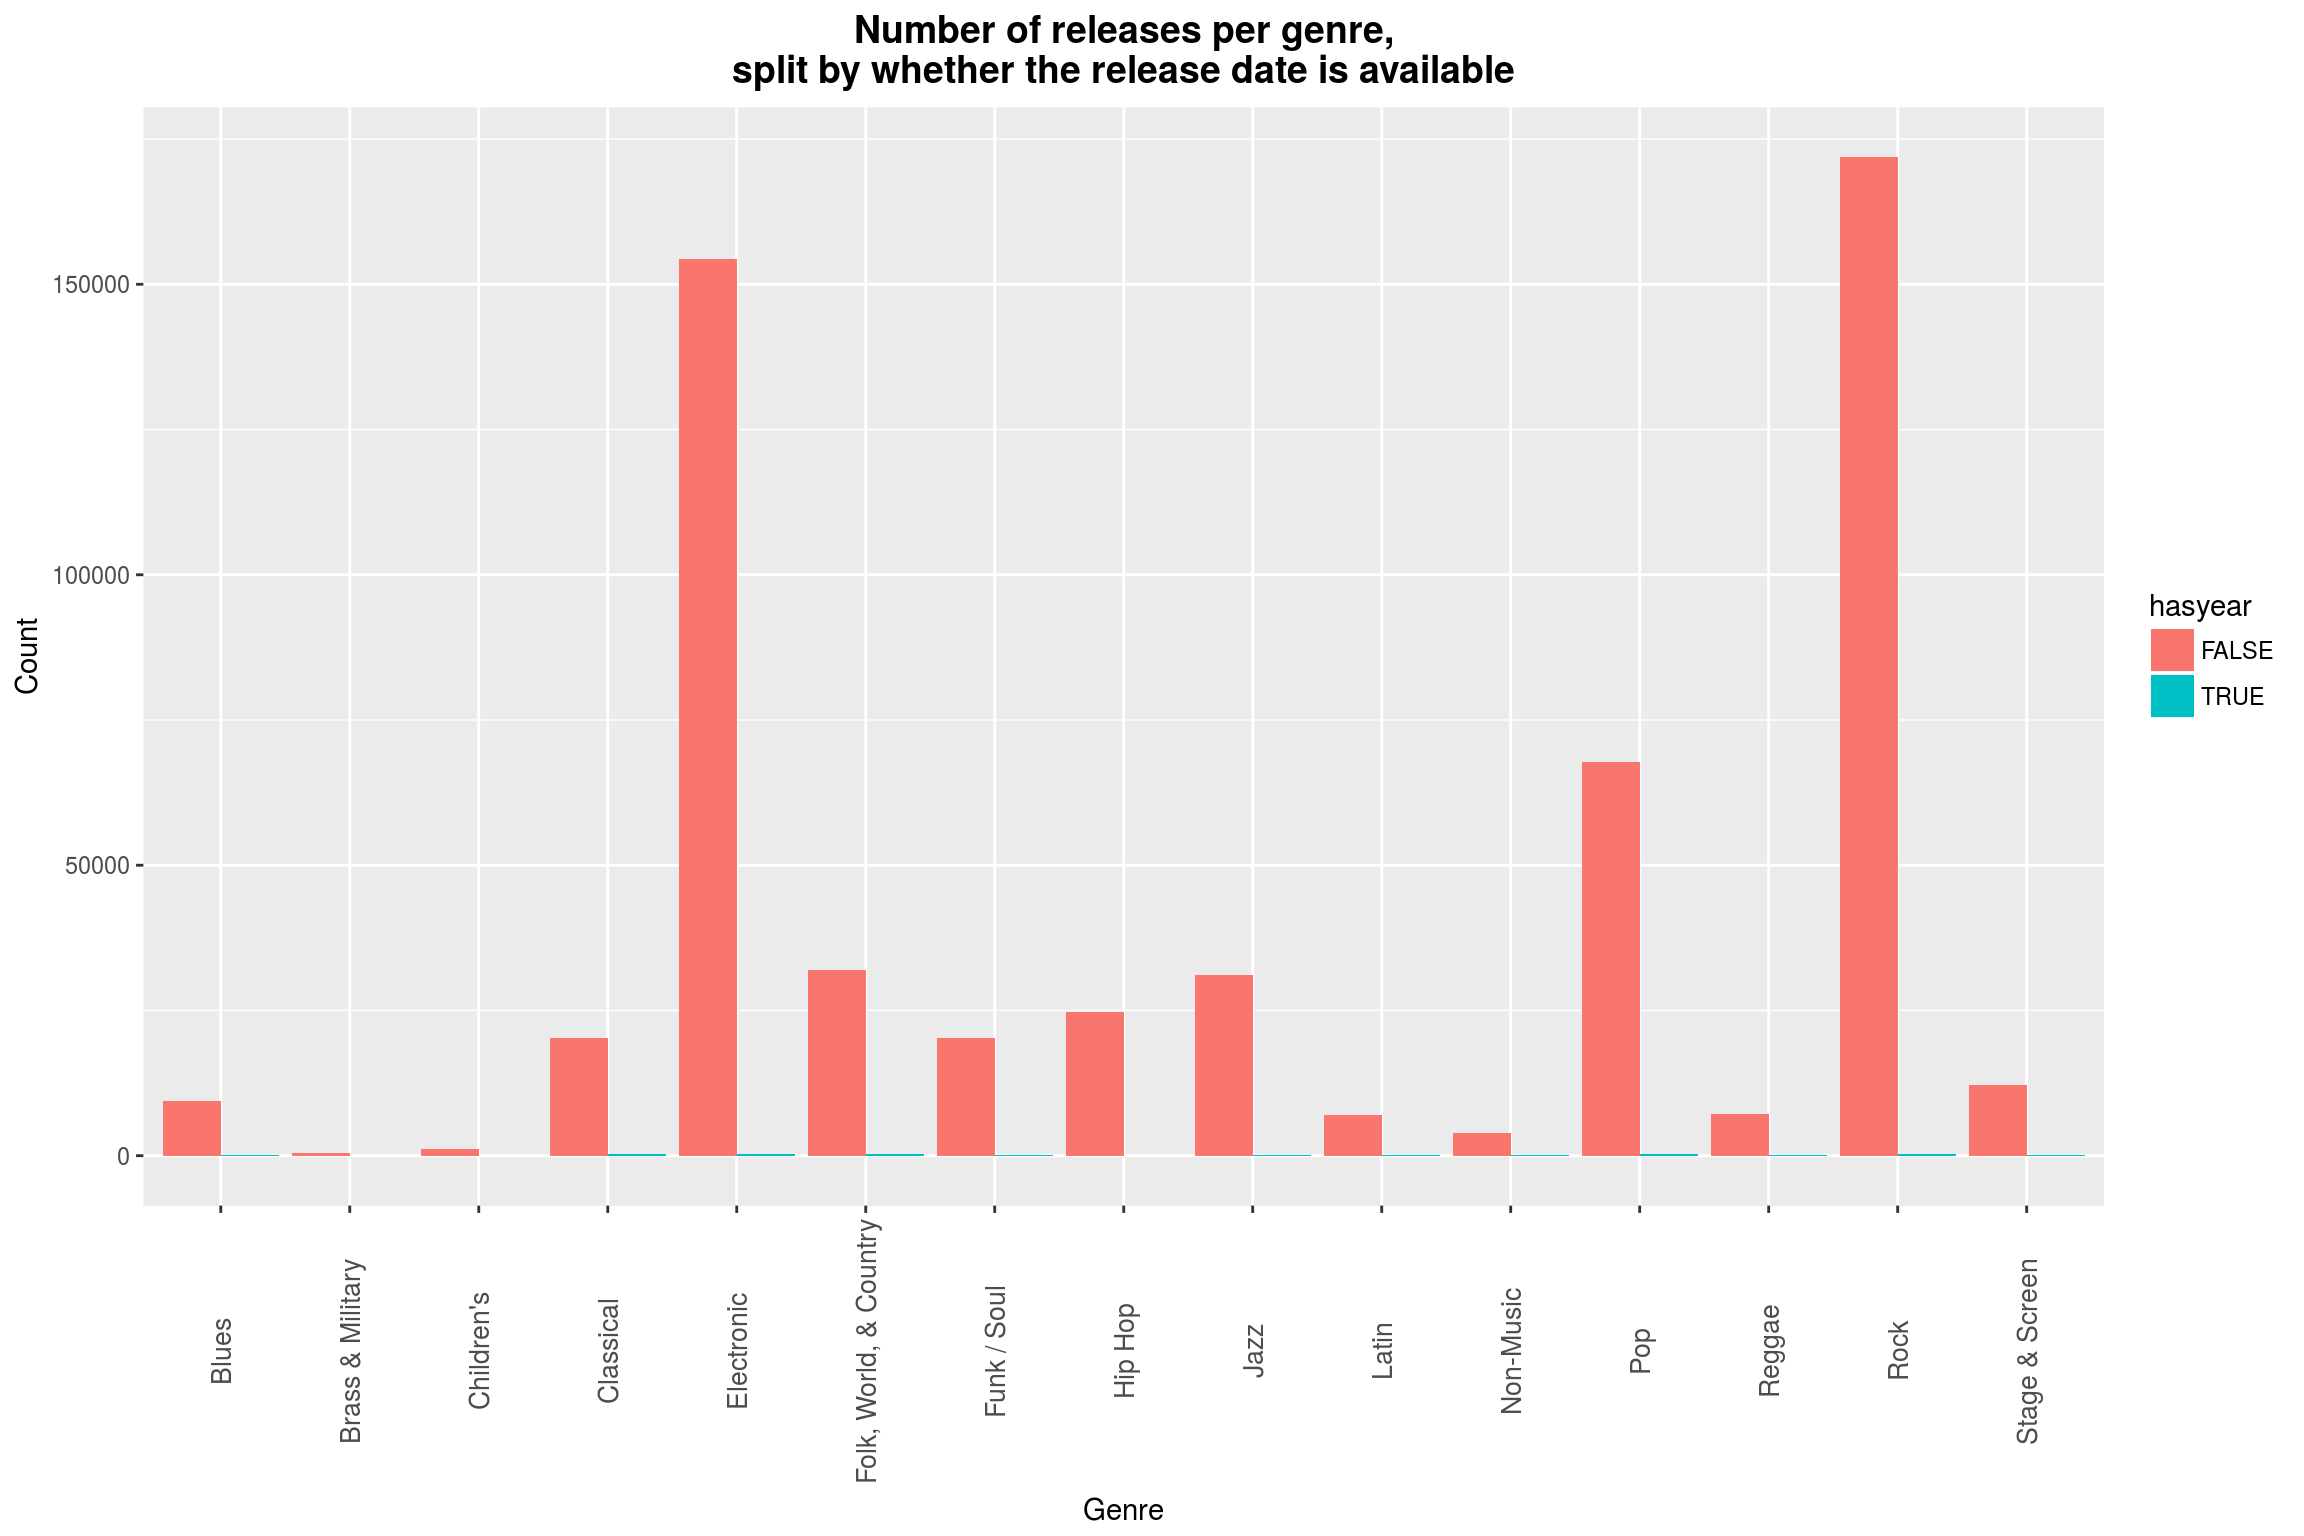 Number of releases per genre, split by whether the release date is missing